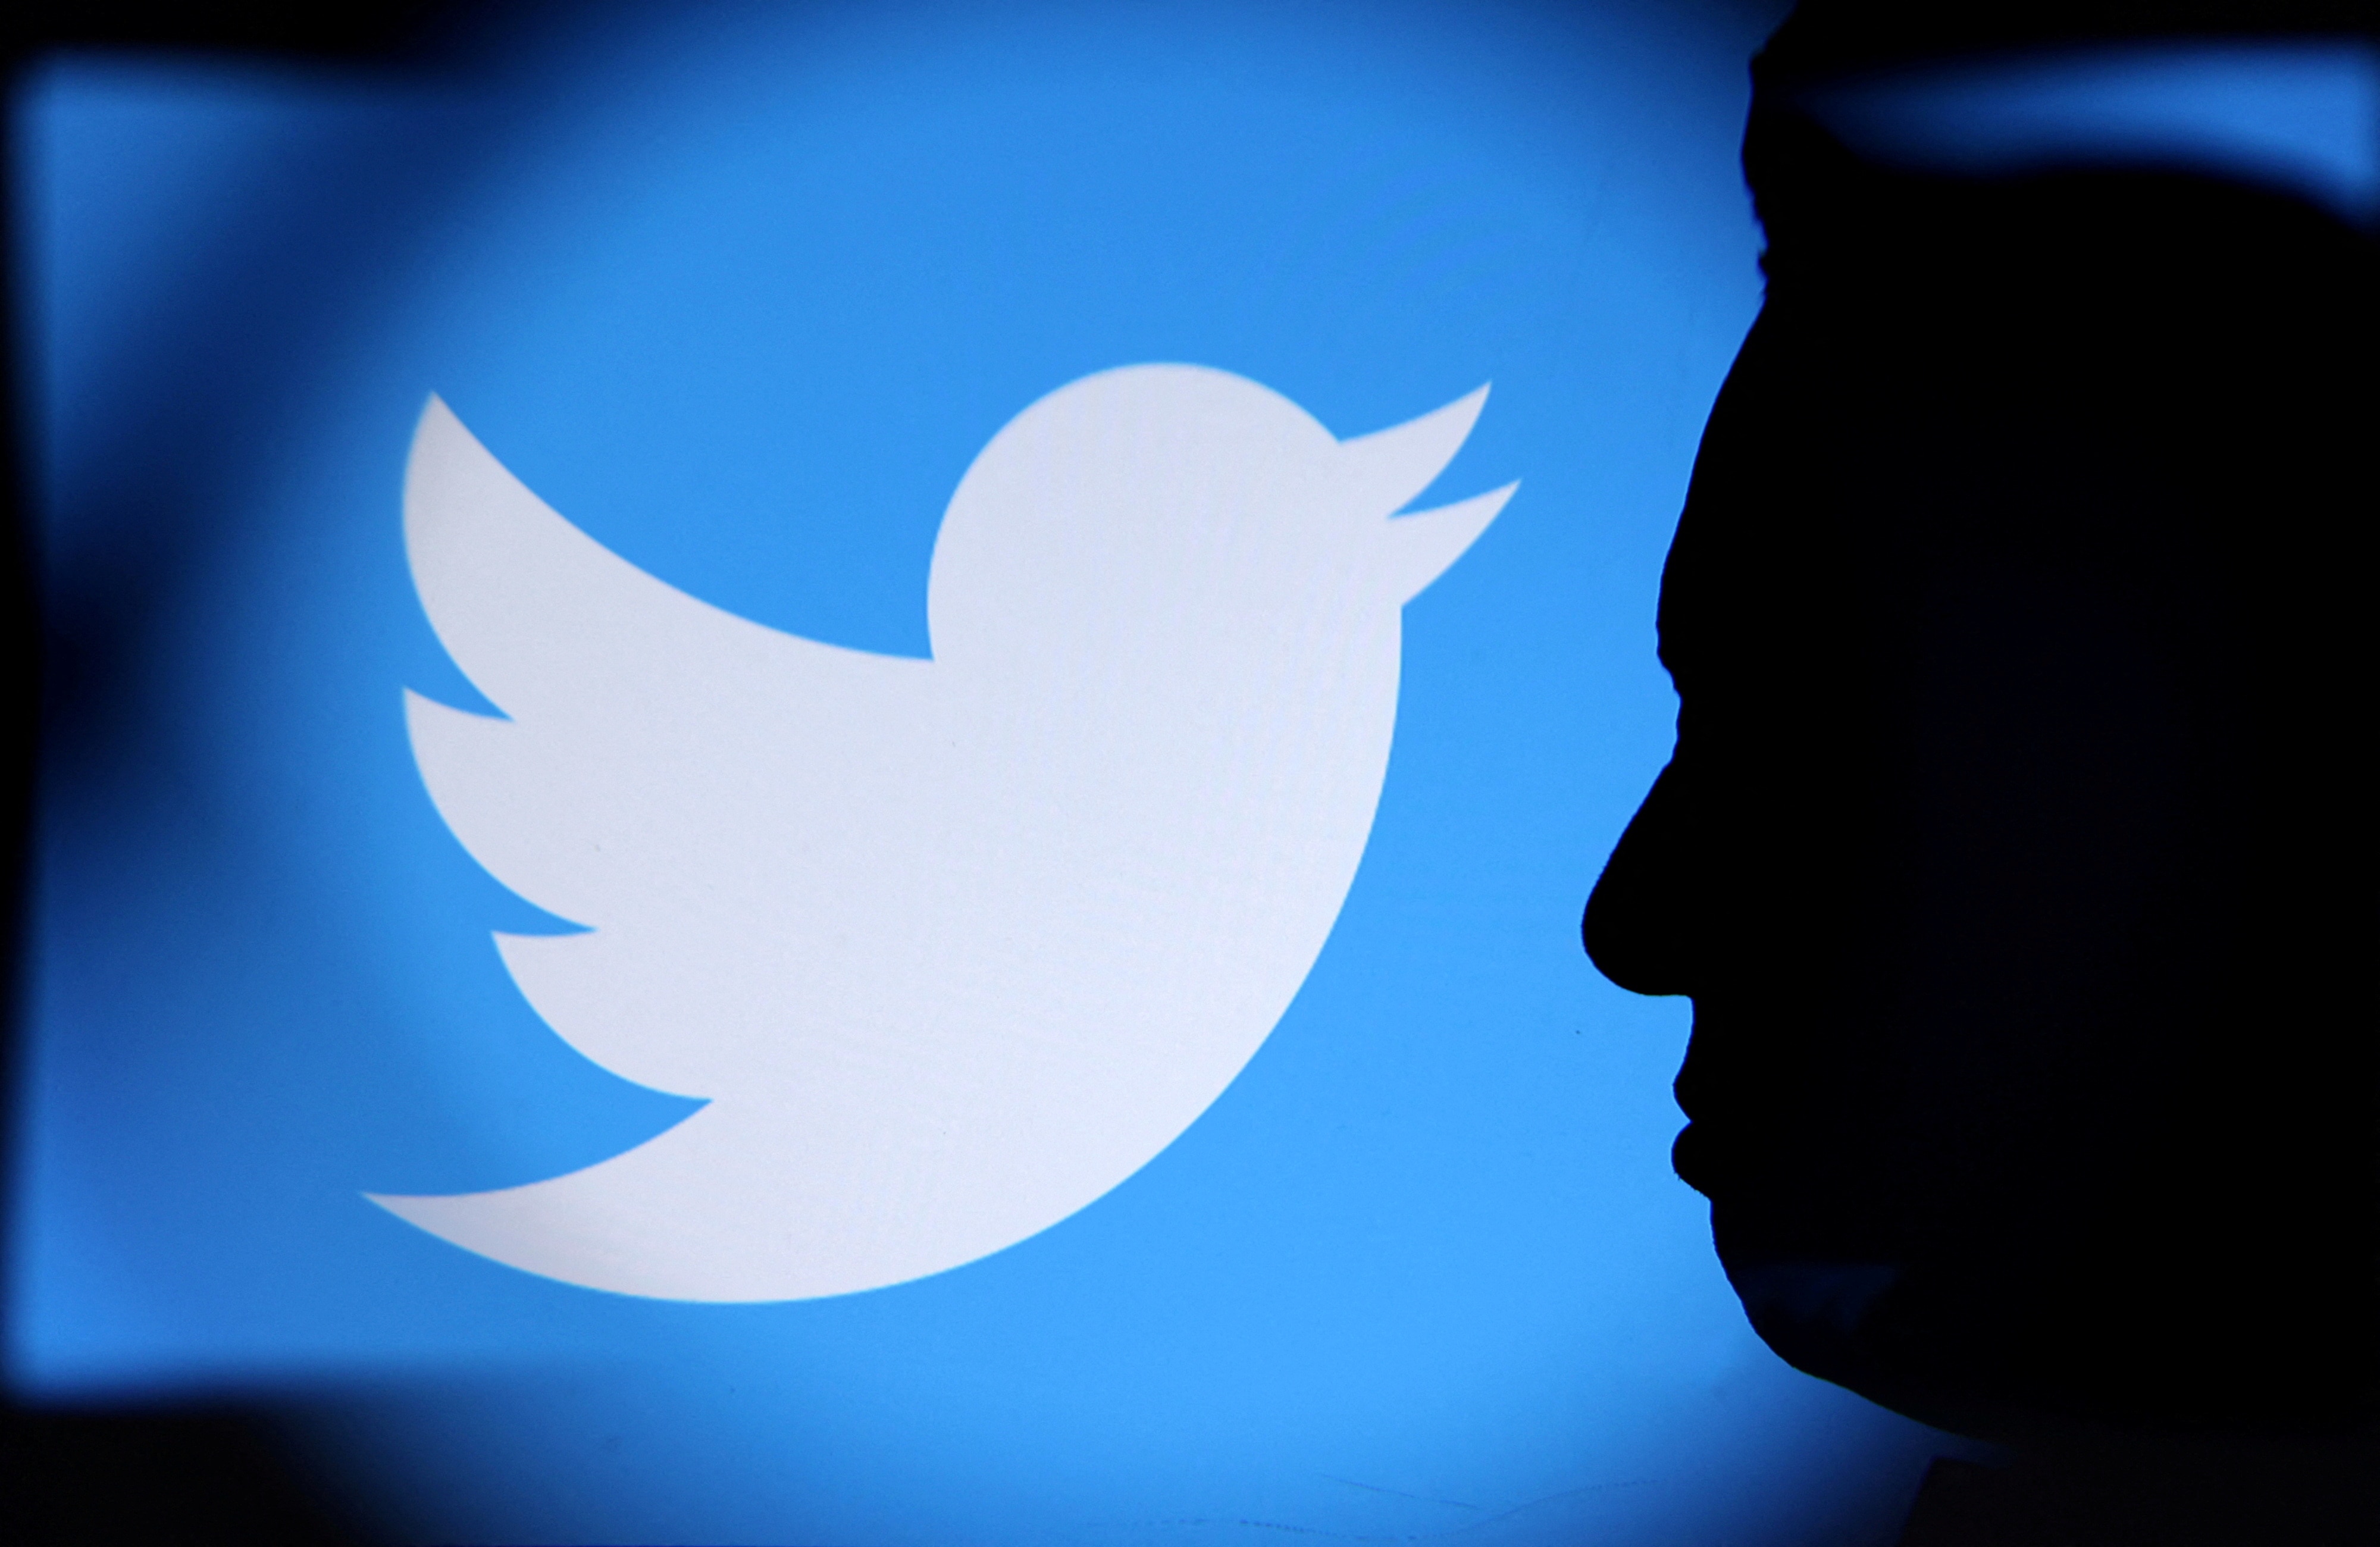 Online regulator says Twitter has axed Australian staff that it reported child abuse material to